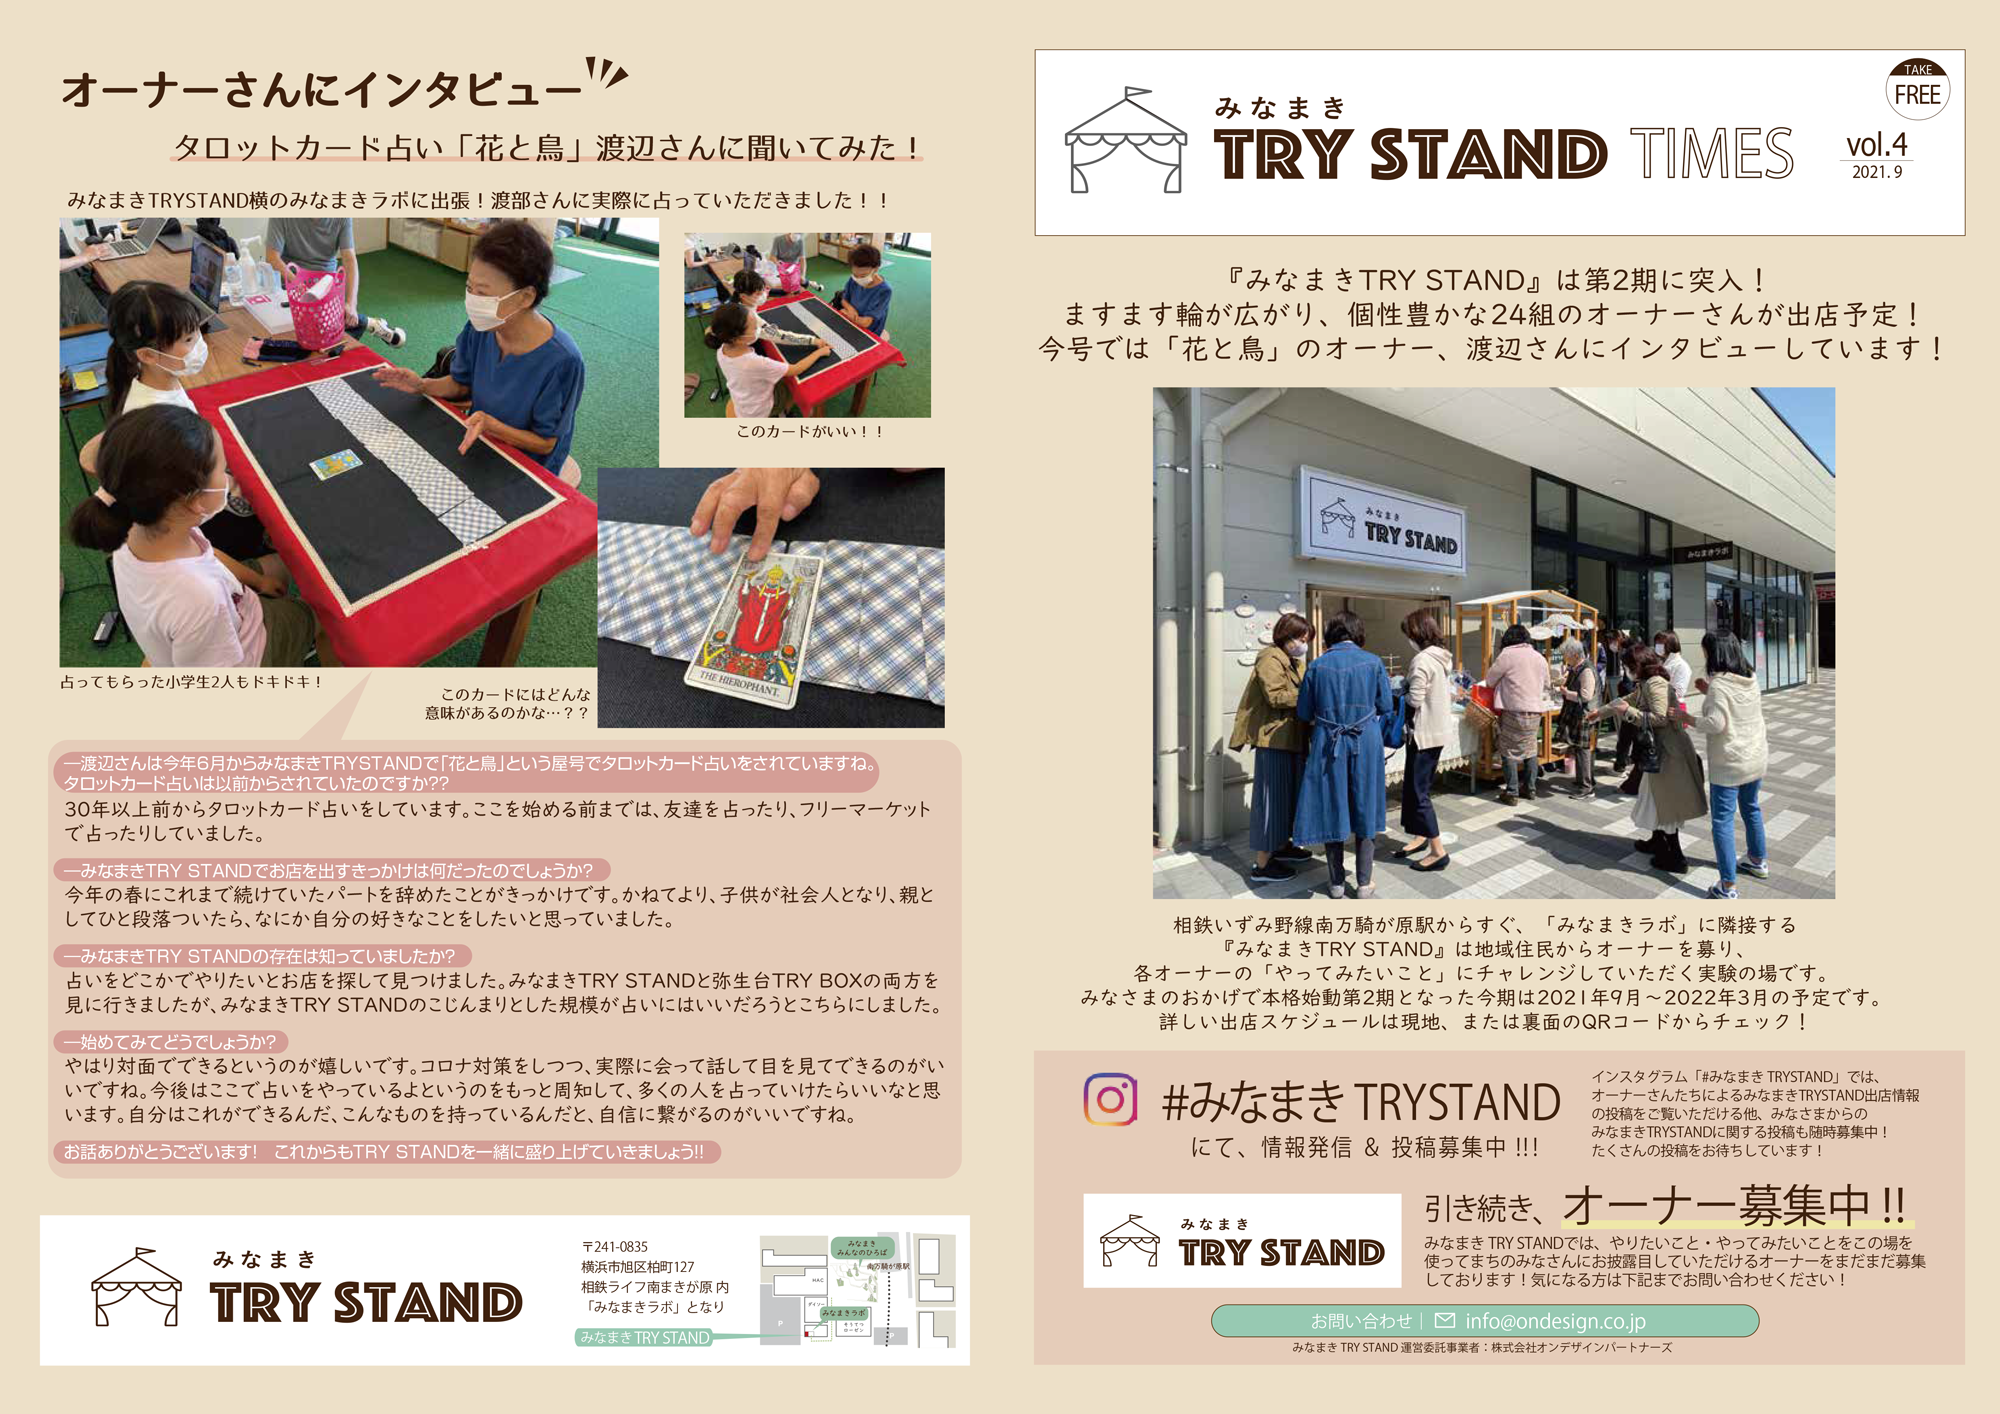 <span class="title">みなまきTRY STAND：TRY STAND TIMES vol.4</span>